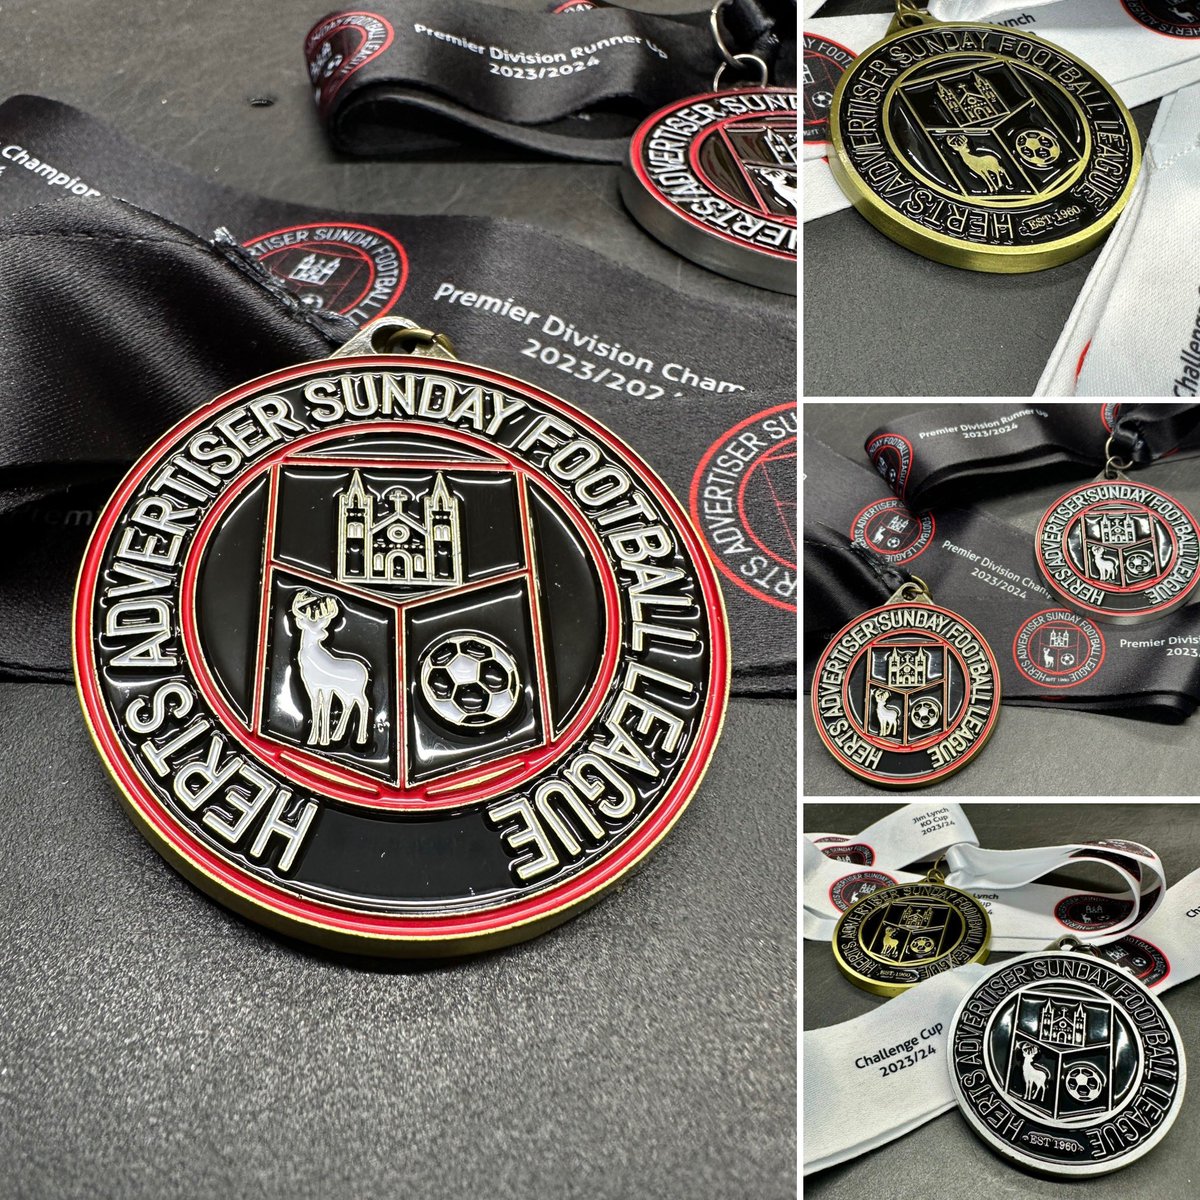 Our latest set of designed quality bespoke medals and ribbons. Supplied by us to our friends @hertsadsl Herts Advertiser Sunday Football League. 😊⚽️🥇